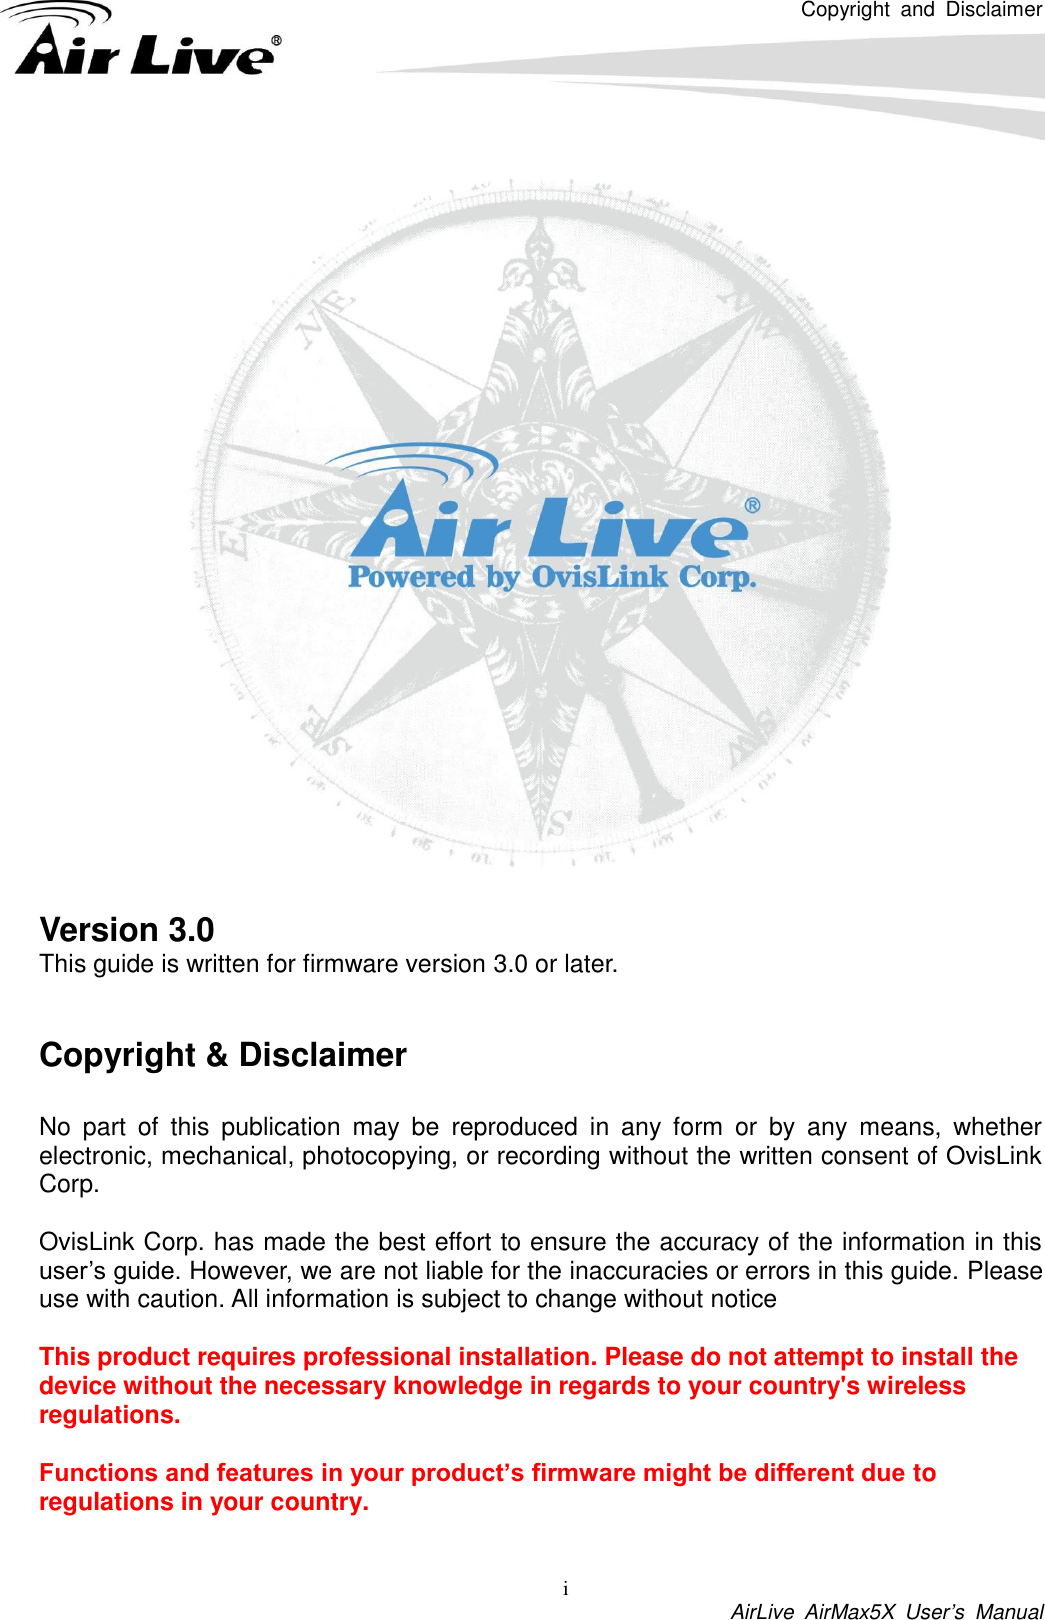 Copyright  and  Disclaimer i  AirLive  AirMax5X  User’s  Manual     Version 3.0 This guide is written for firmware version 3.0 or later.   Copyright &amp; Disclaimer  No  part  of  this  publication  may  be  reproduced  in  any  form  or  by  any  means,  whether electronic, mechanical, photocopying, or recording without the written consent of OvisLink Corp.    OvisLink Corp. has made the best effort to ensure the accuracy of the information in this user’s guide. However, we are not liable for the inaccuracies or errors in this guide. Please use with caution. All information is subject to change without notice This product requires professional installation. Please do not attempt to install the device without the necessary knowledge in regards to your country&apos;s wireless regulations. Functions and features in your product’s firmware might be different due to regulations in your country.  